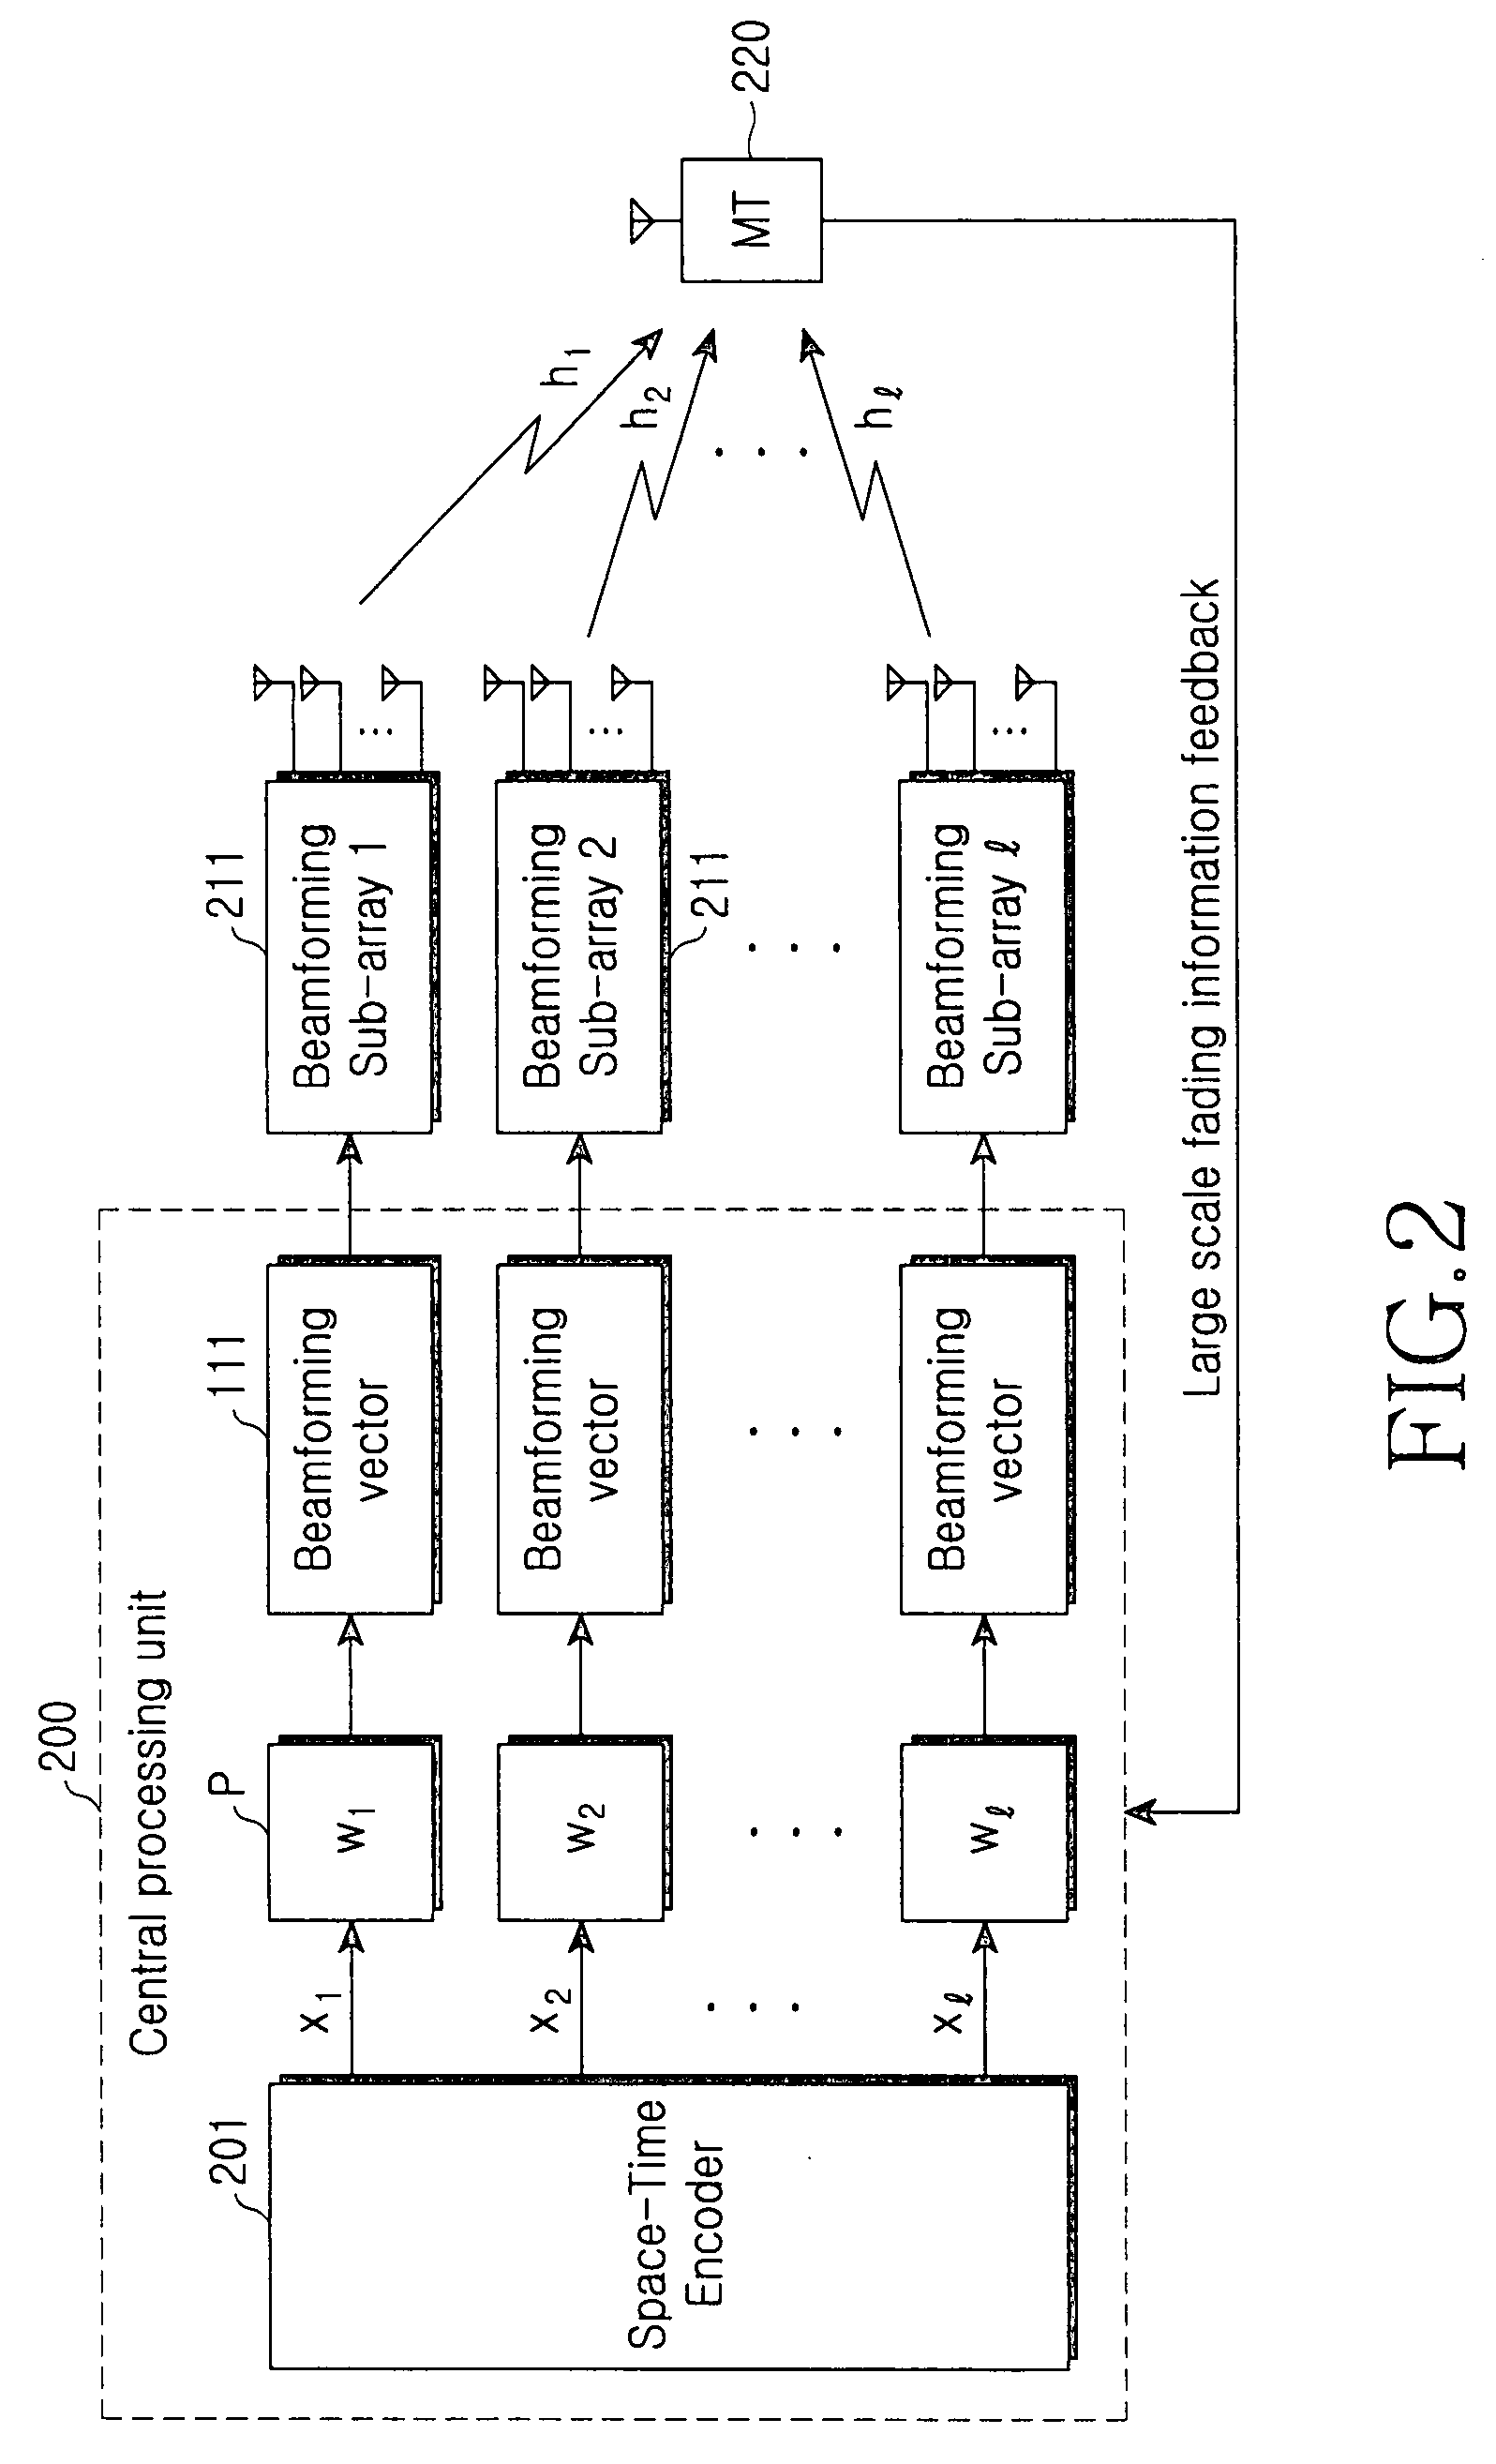 Method and apparatus for adaptively allocating transmission power for beam-forming combined with OSTBCs in a distributed wireless communication system